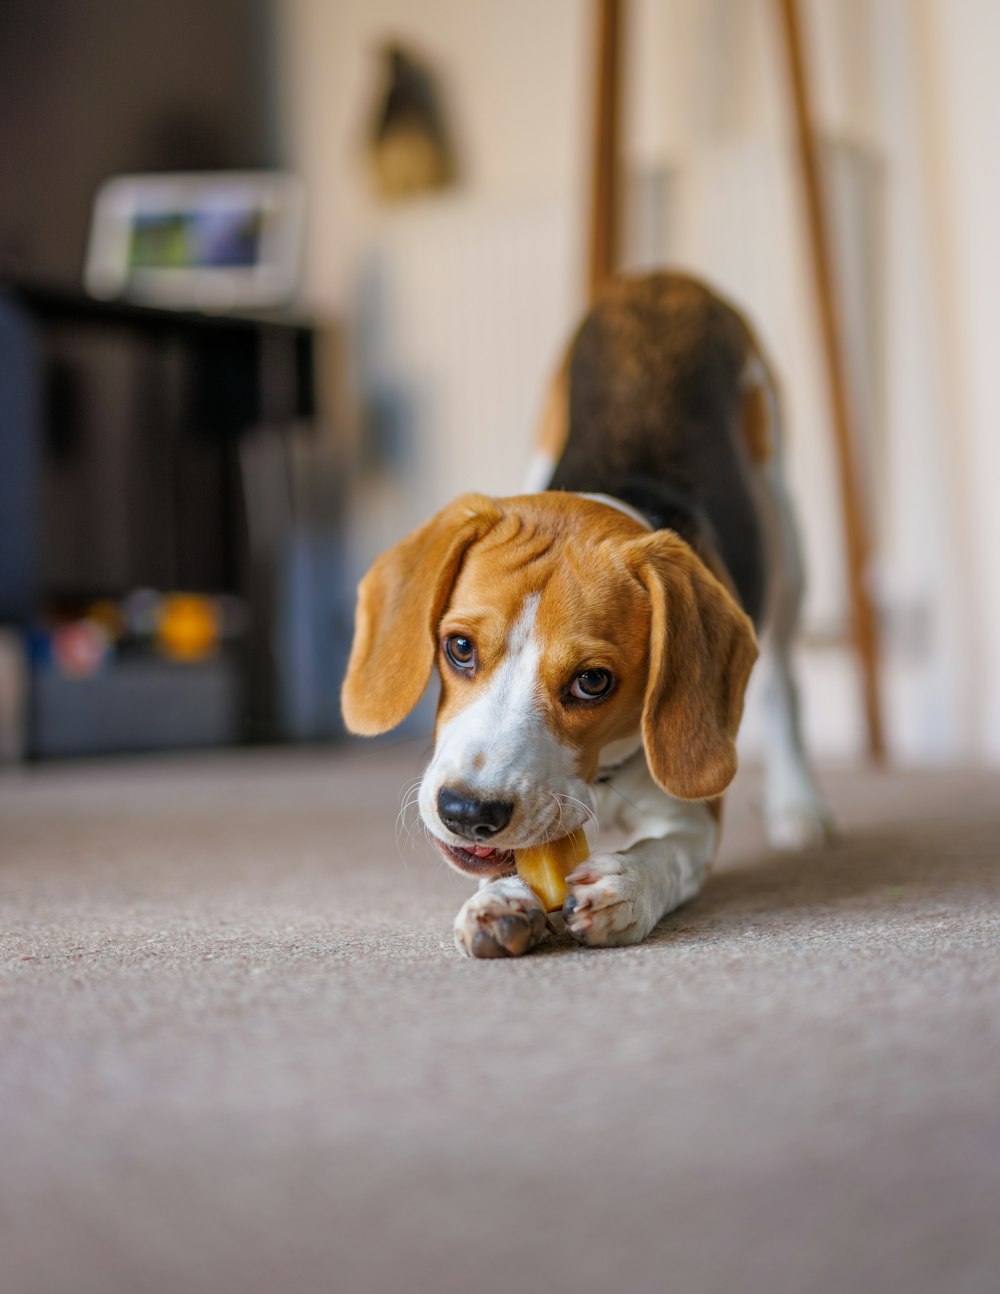 a beagle puppy chewing on a toy in a living room